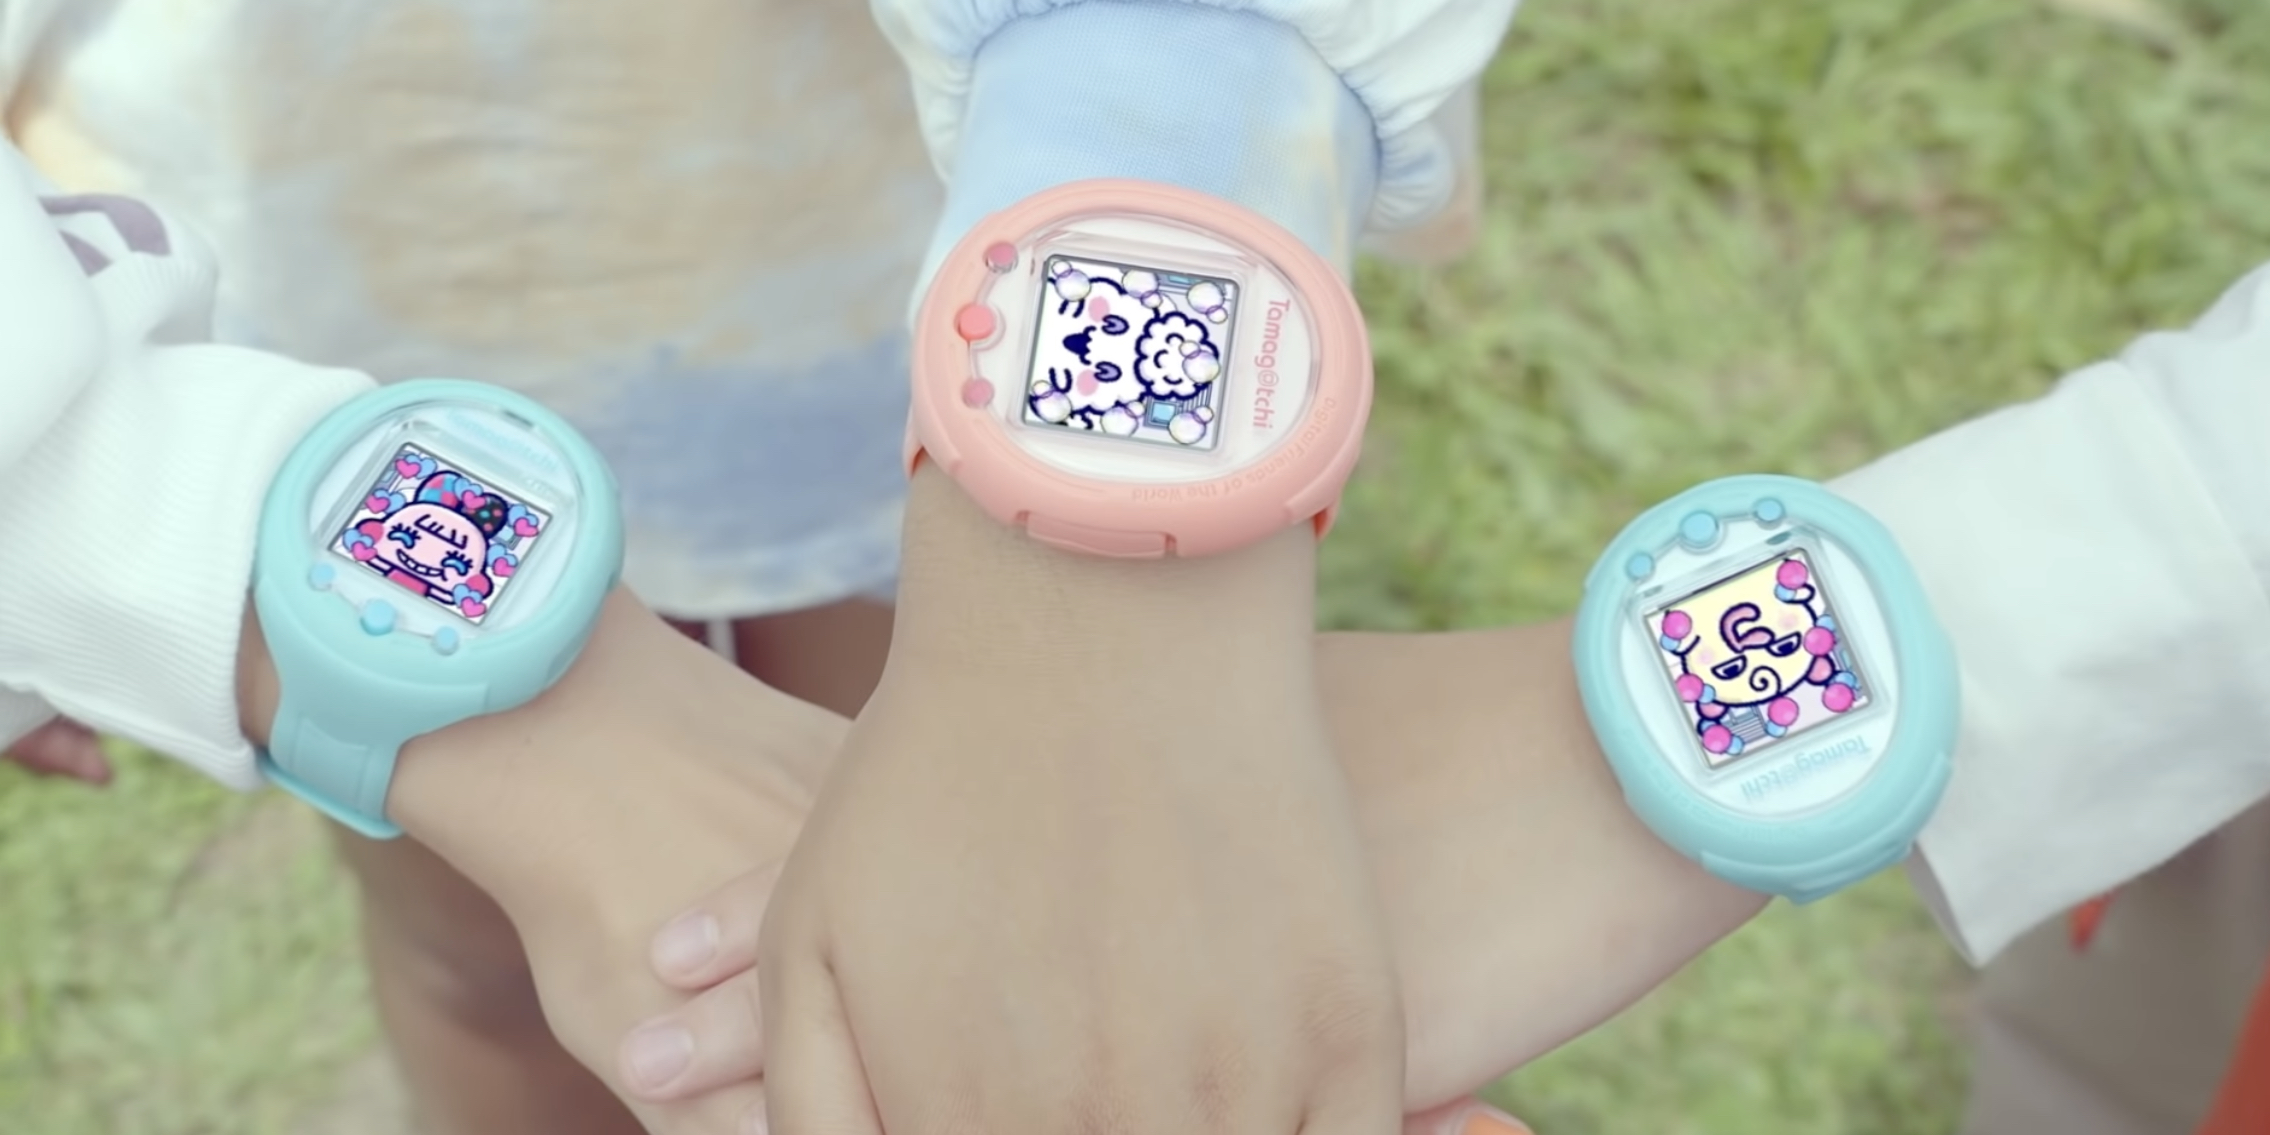 For the 25th anniversary Tamagotchi has been re-released as a Smart watch - meet Tamagotchi Smart for $60